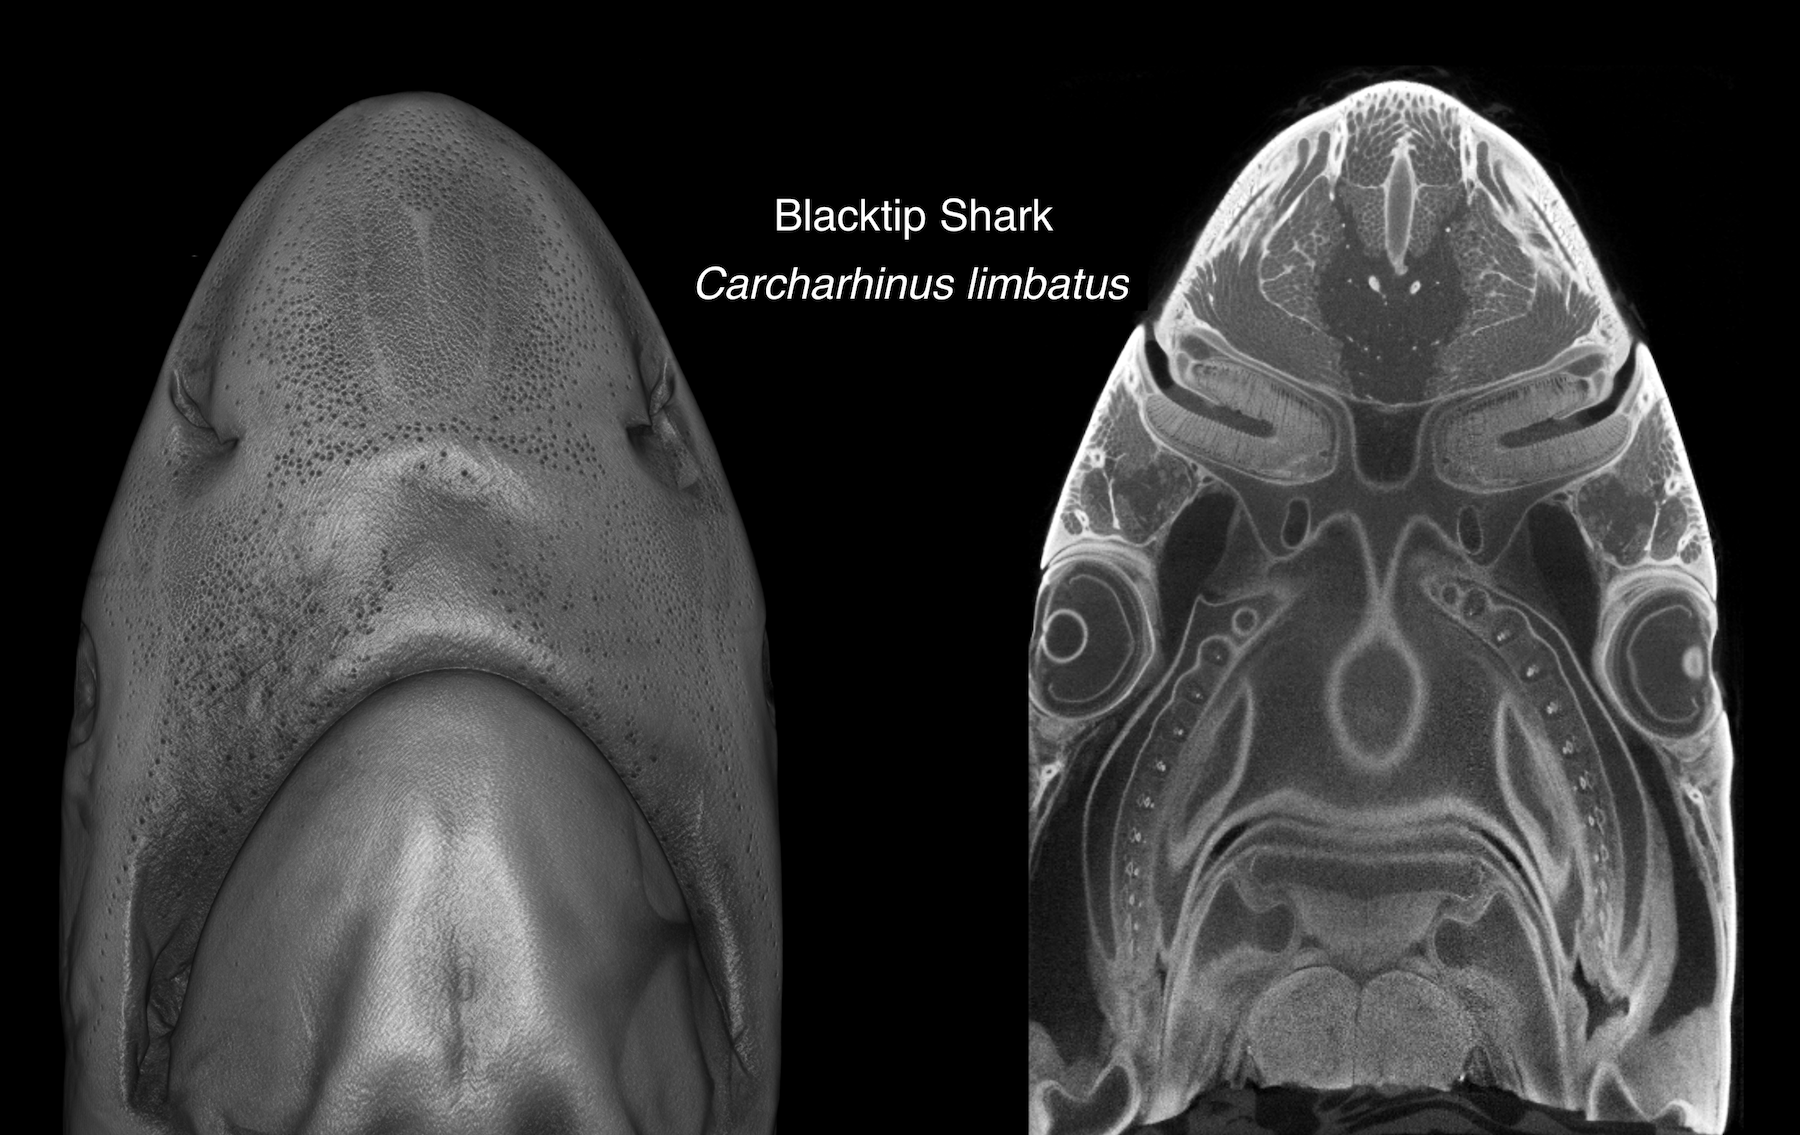 Left: the underside of a shark's face. Right: The x-ray version of the same shark's face, showing intricate tunnels and anatomy